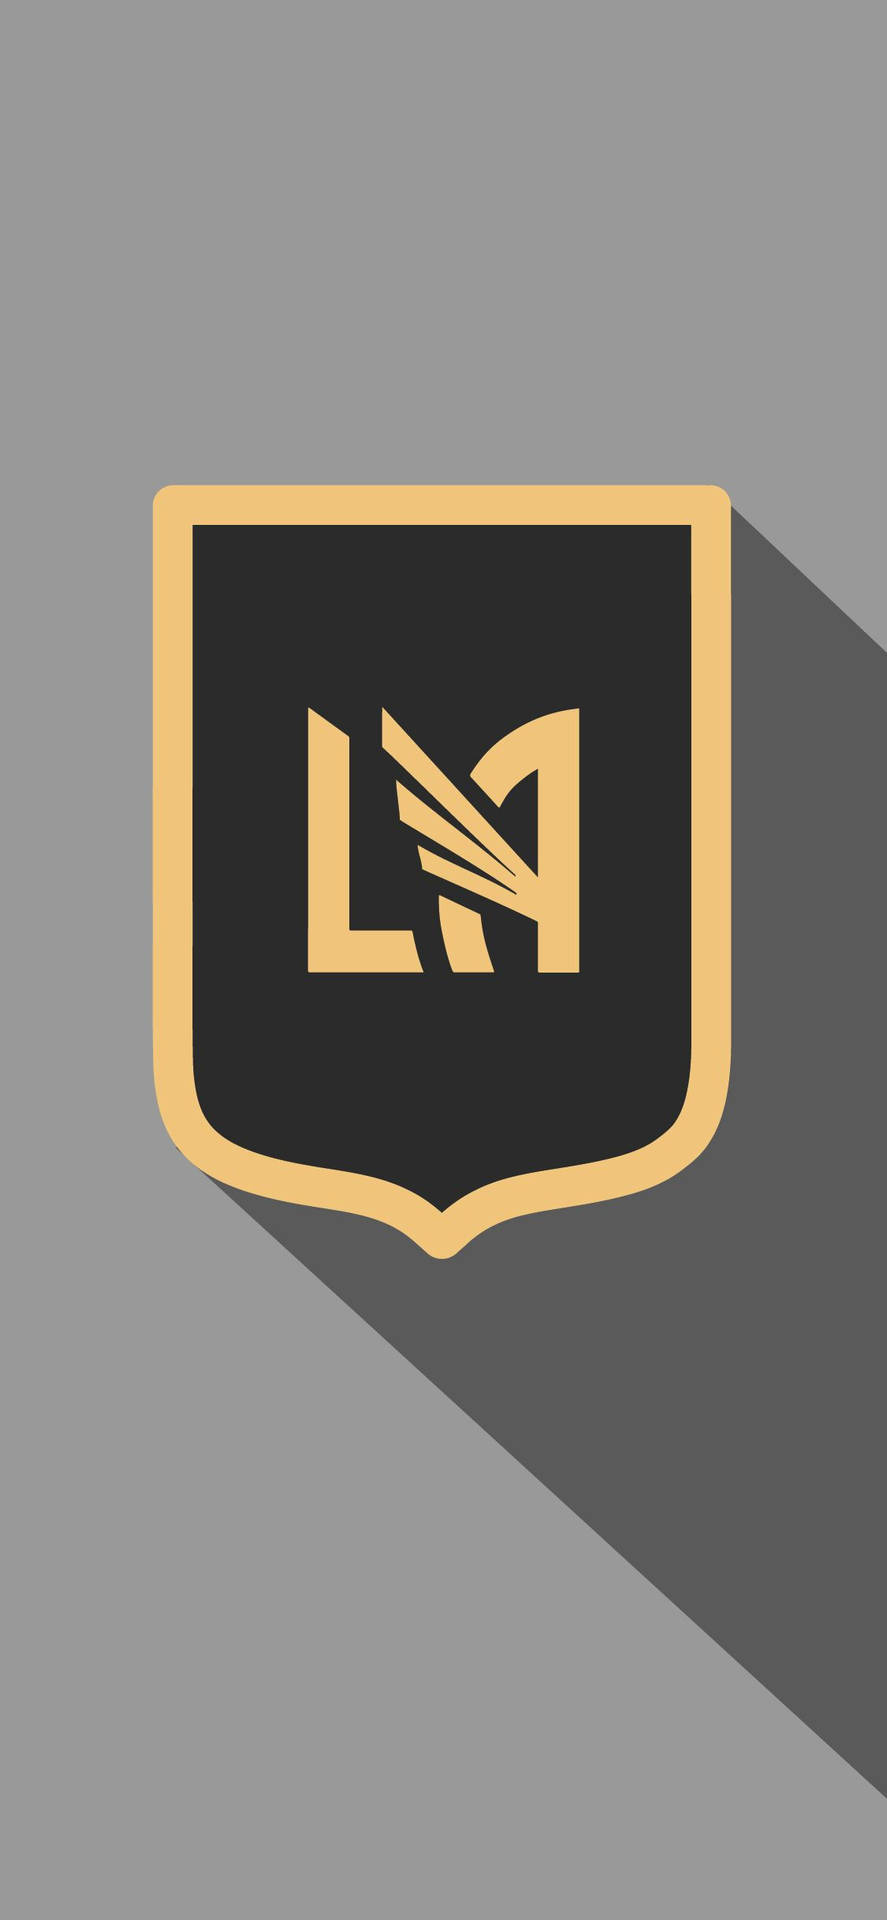 Lafc Logo With Gray Shadow Backdrop Wallpaper